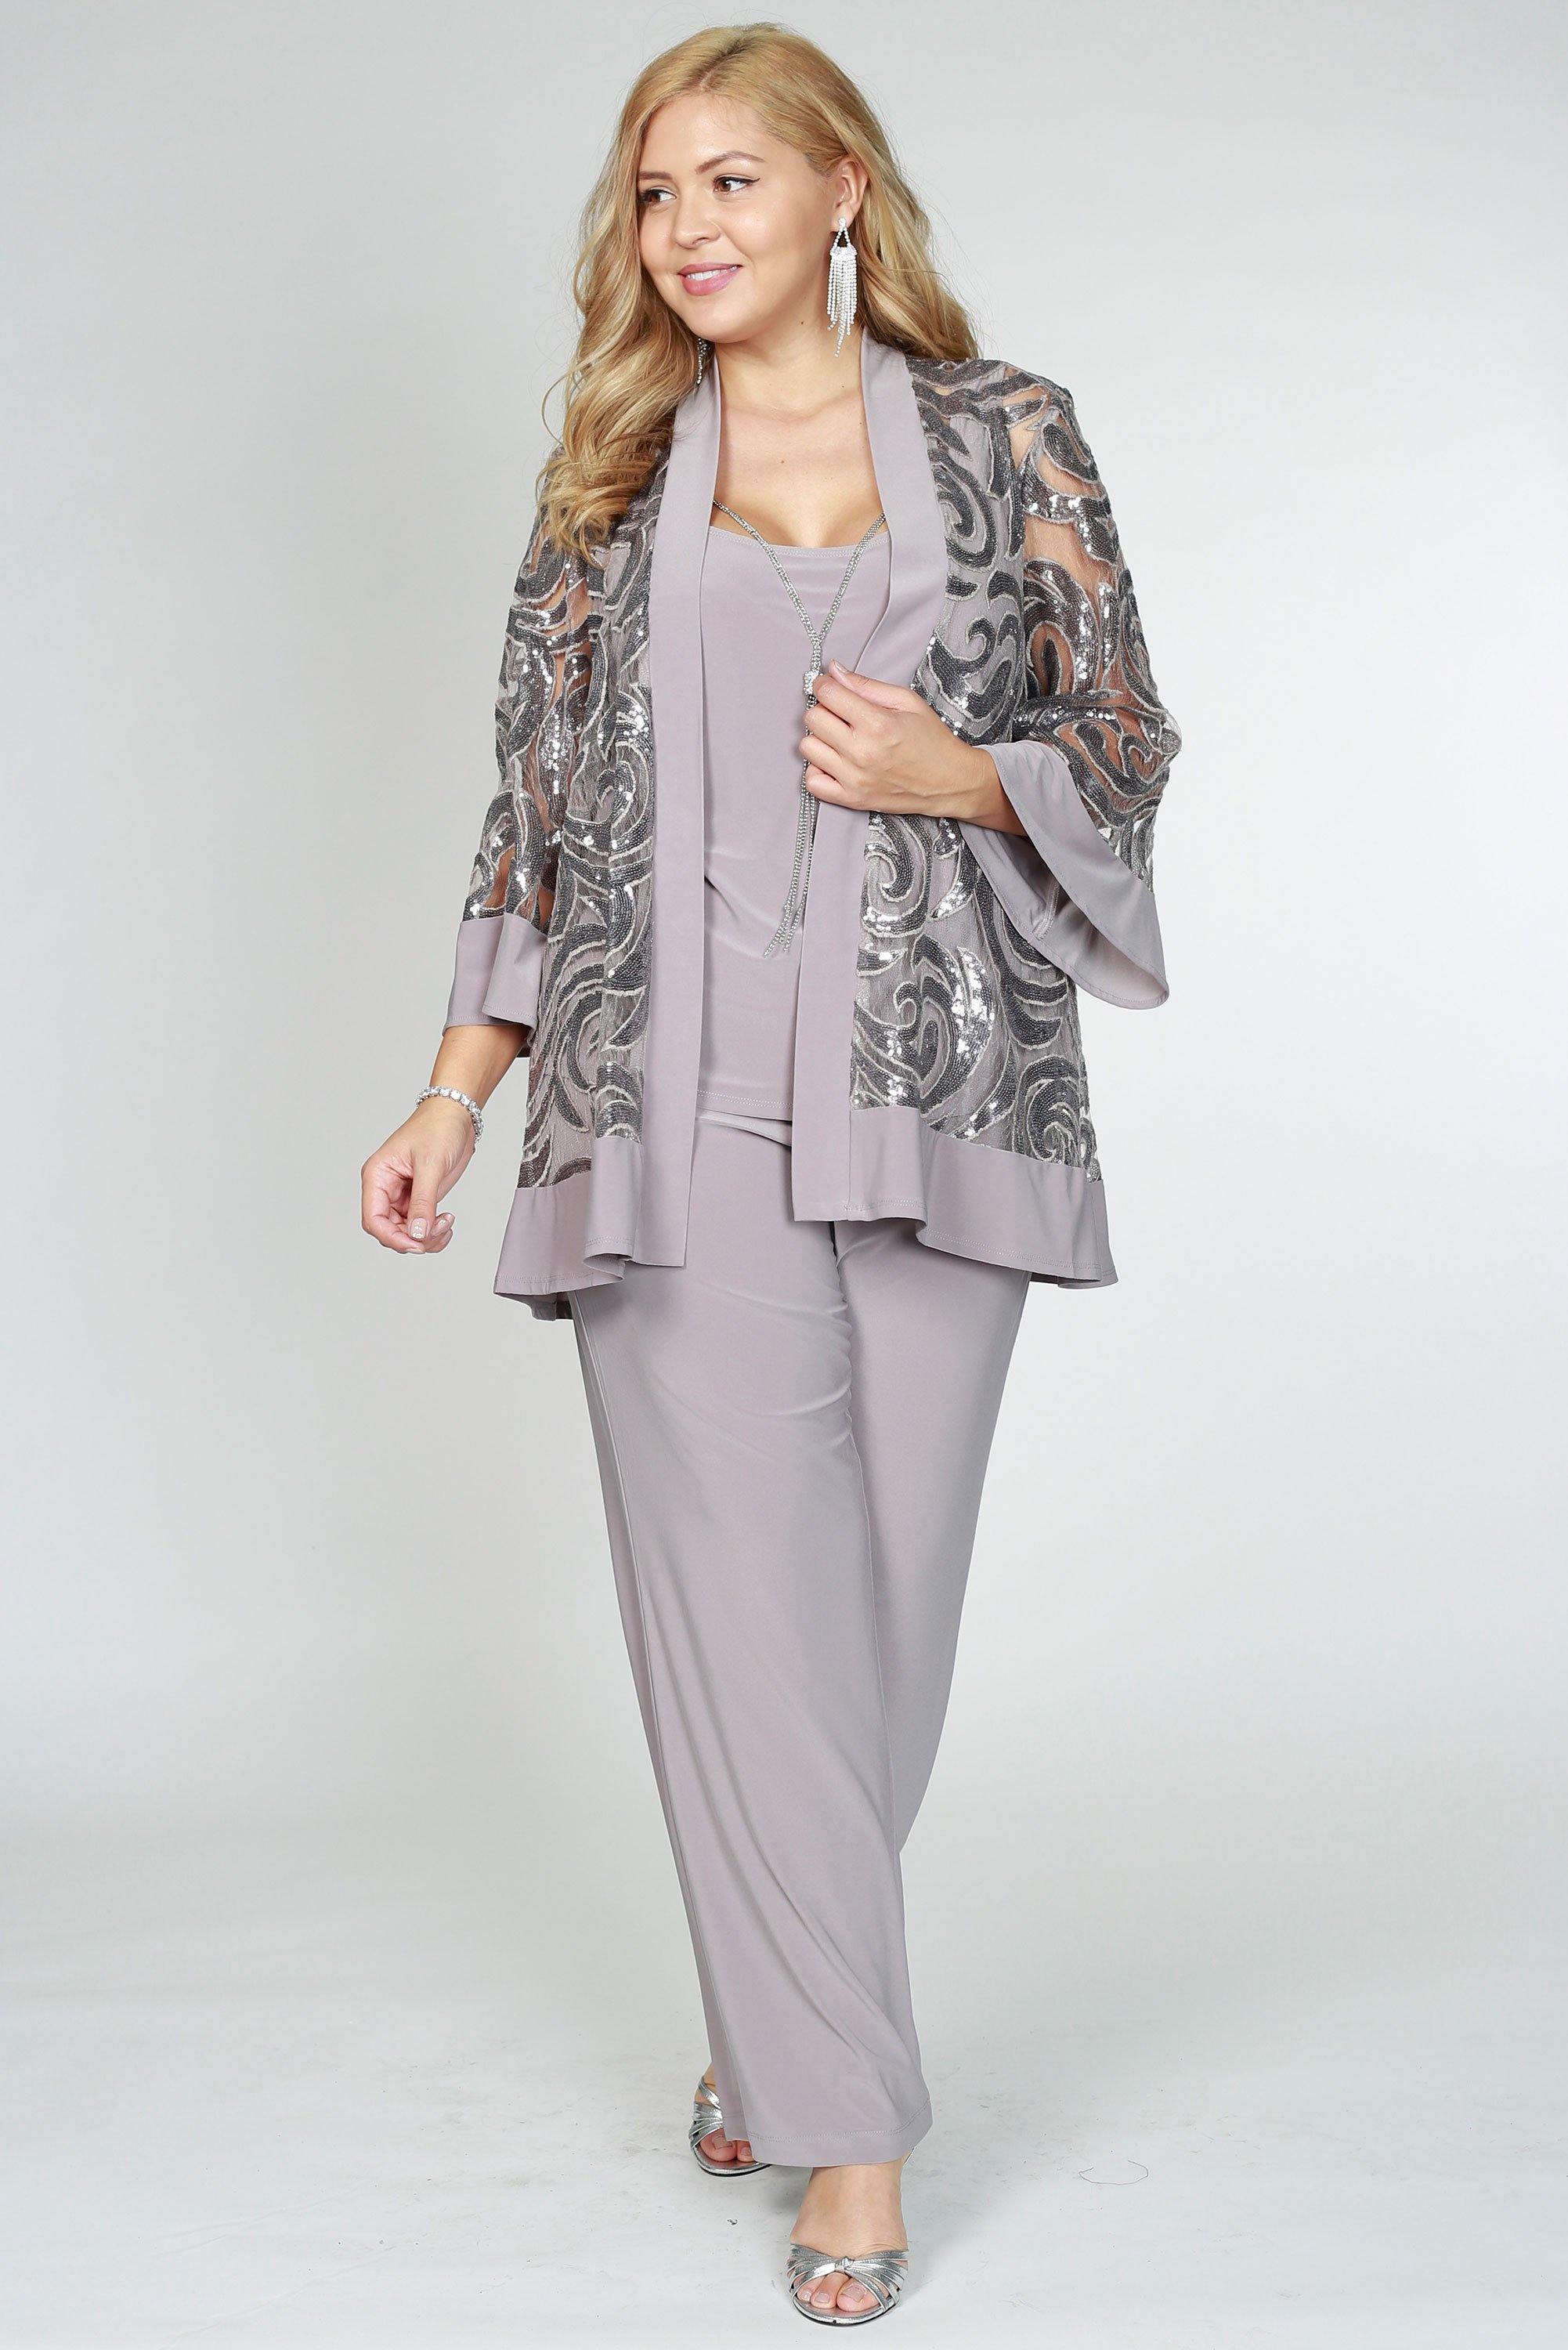 Women's Tahari Pant suits from $35 | Lyst